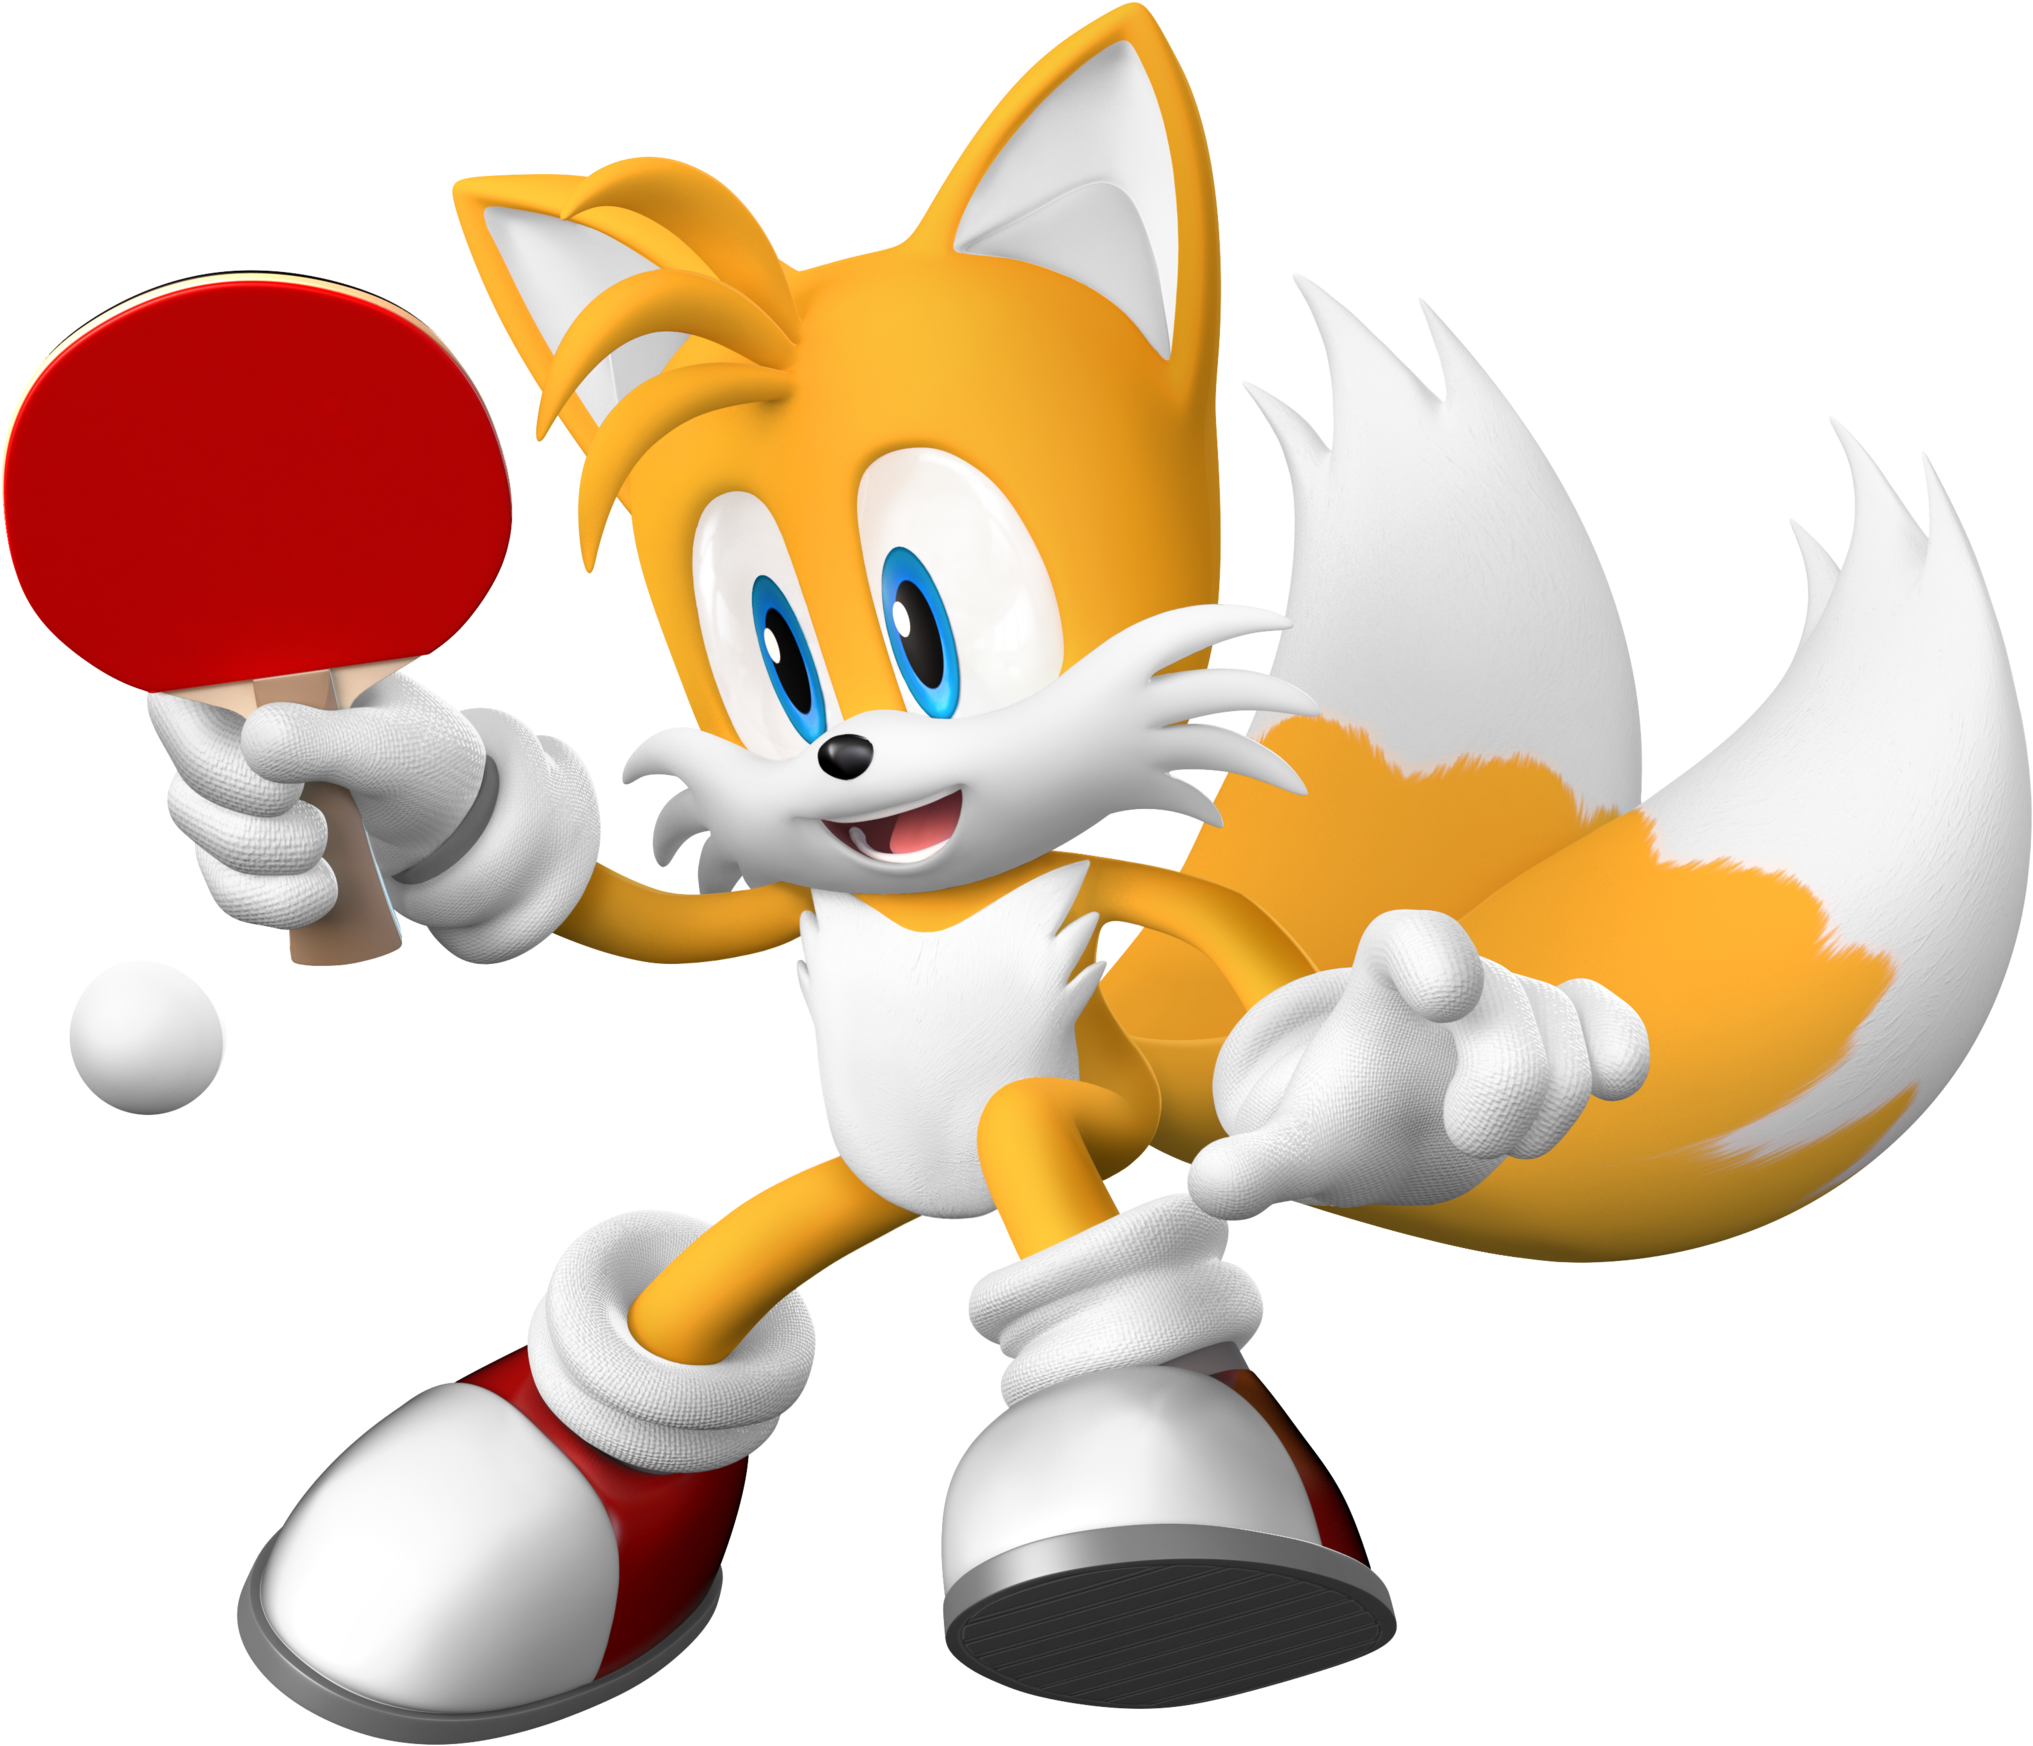 Mario & Sonic At The London 2012 Olympic Games Images - Mario And Sonic At The London 2012 Olympic Games Tails (2560x2560)